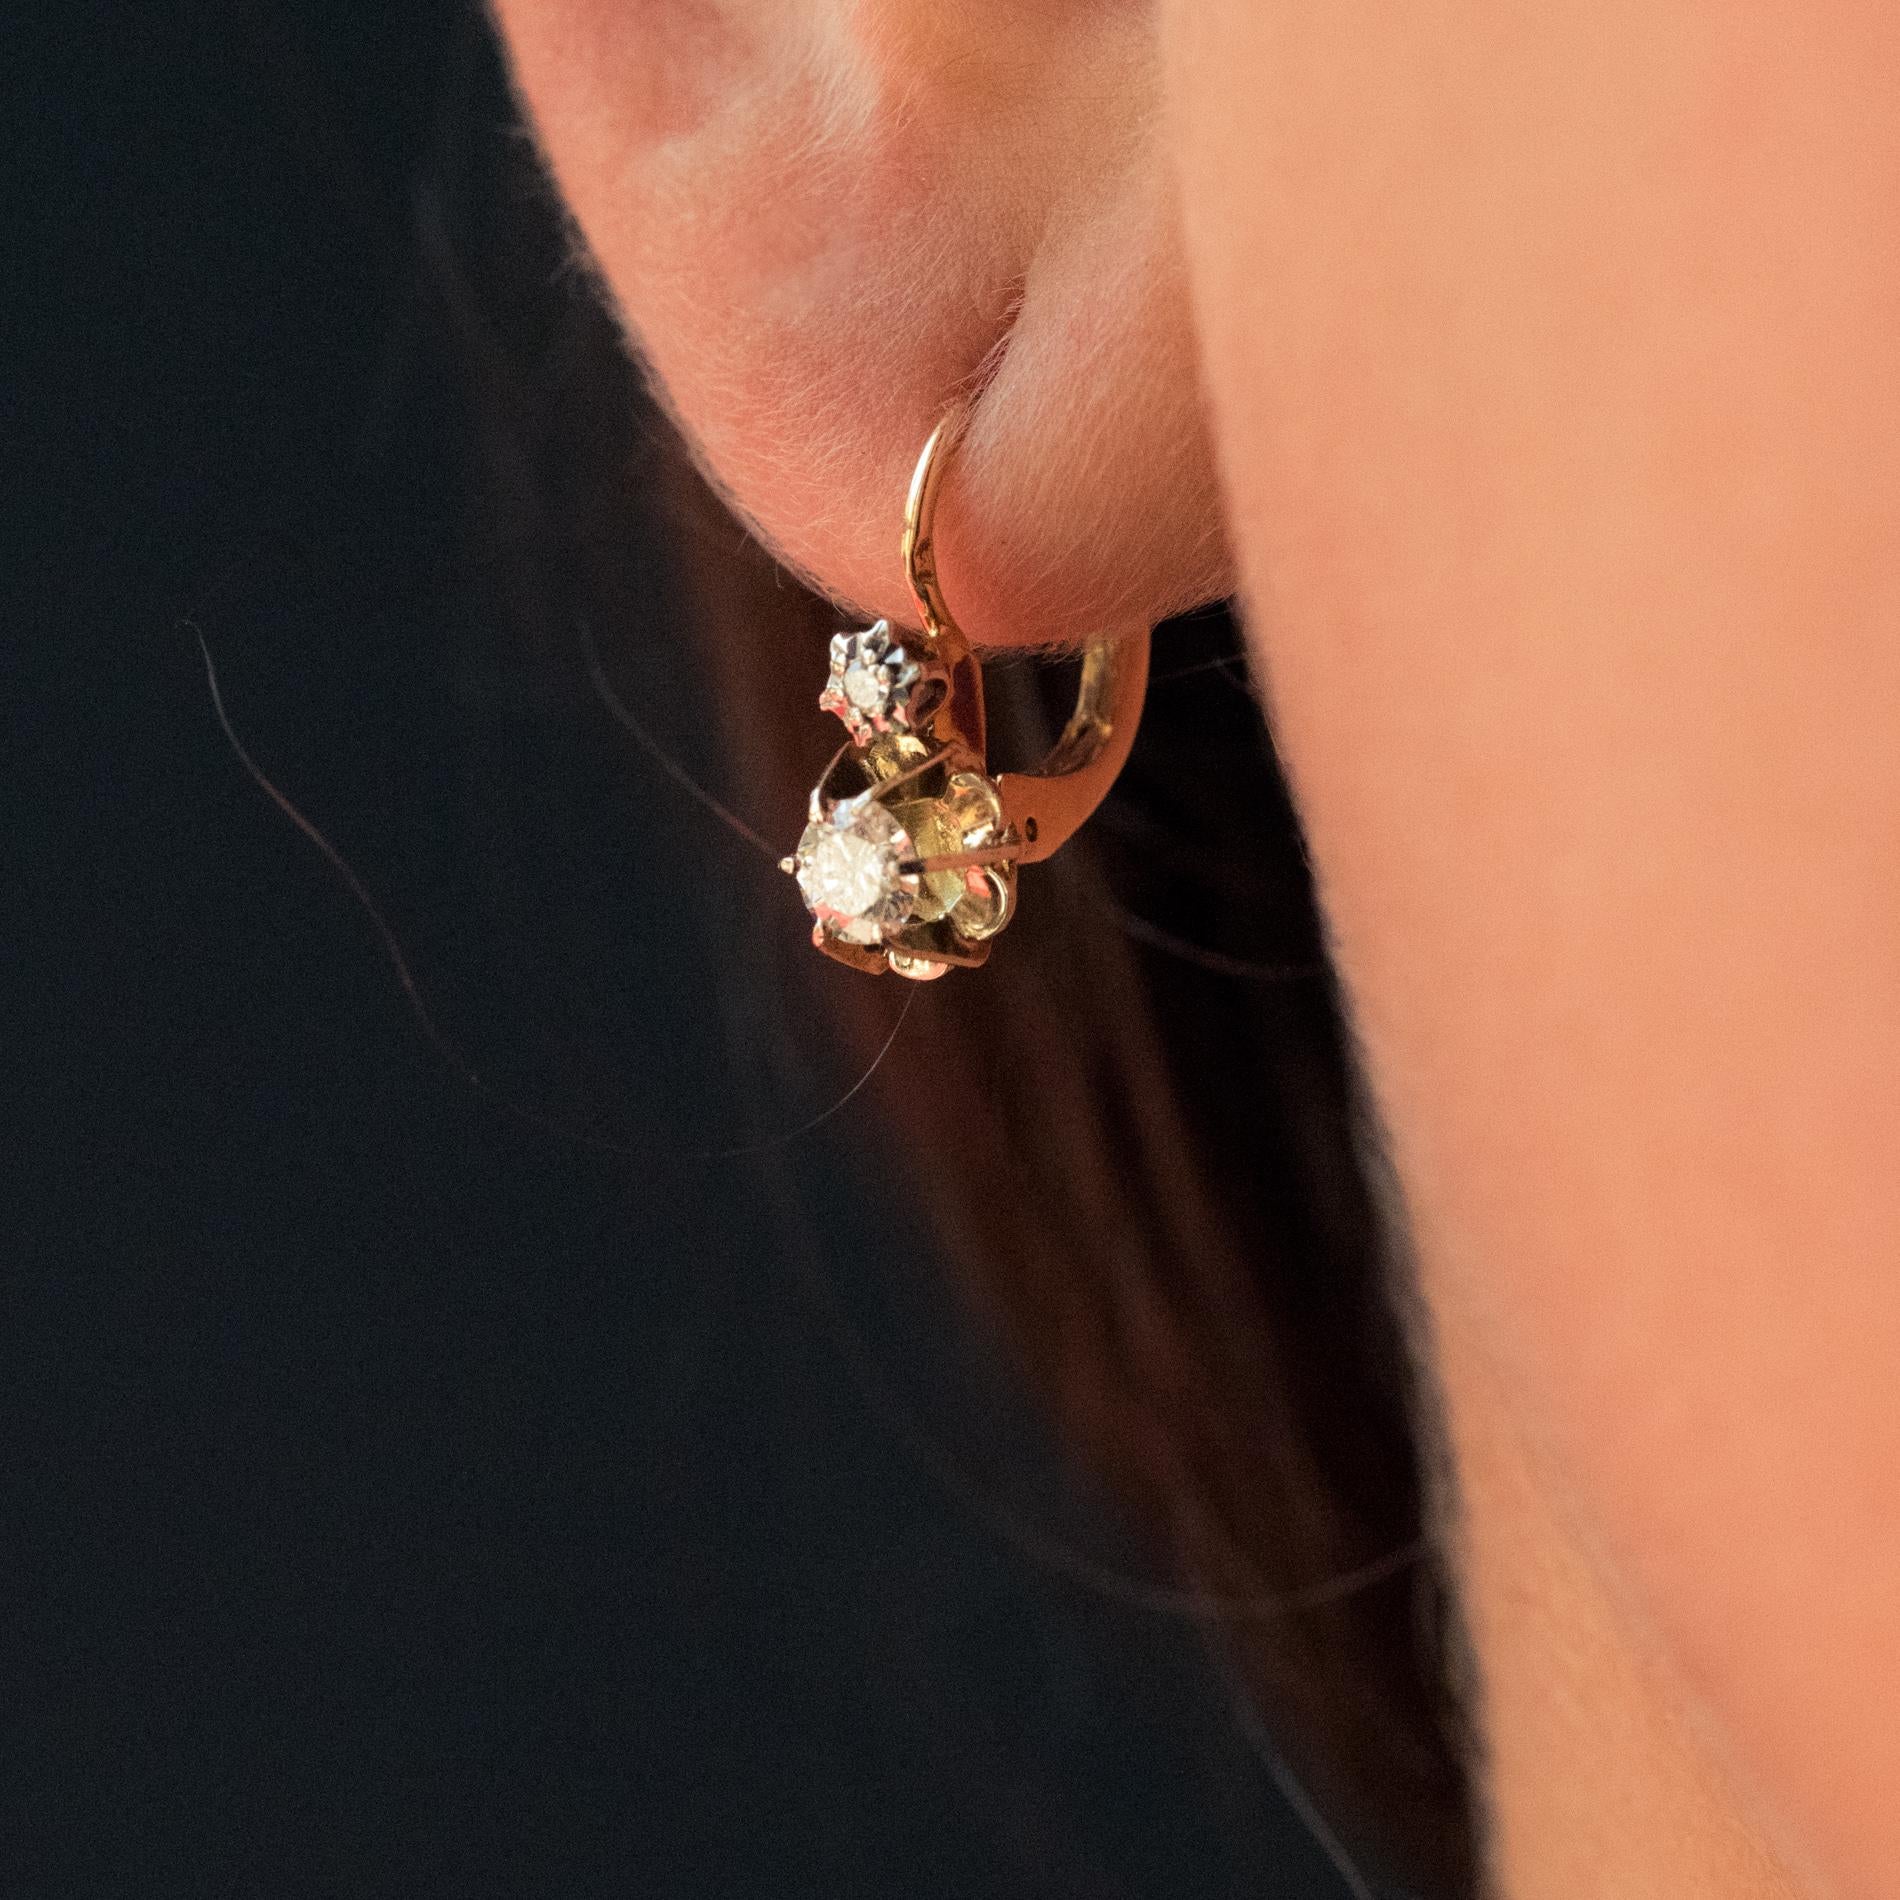 For pierced ears.
Earrings in 18 karat yellow gold, eagle's head hallmark.
A great classic in antique jewelry, each lever- back earring is set with a star studded with a diamond which surmounts another set with claws holding a modern brilliant-cut